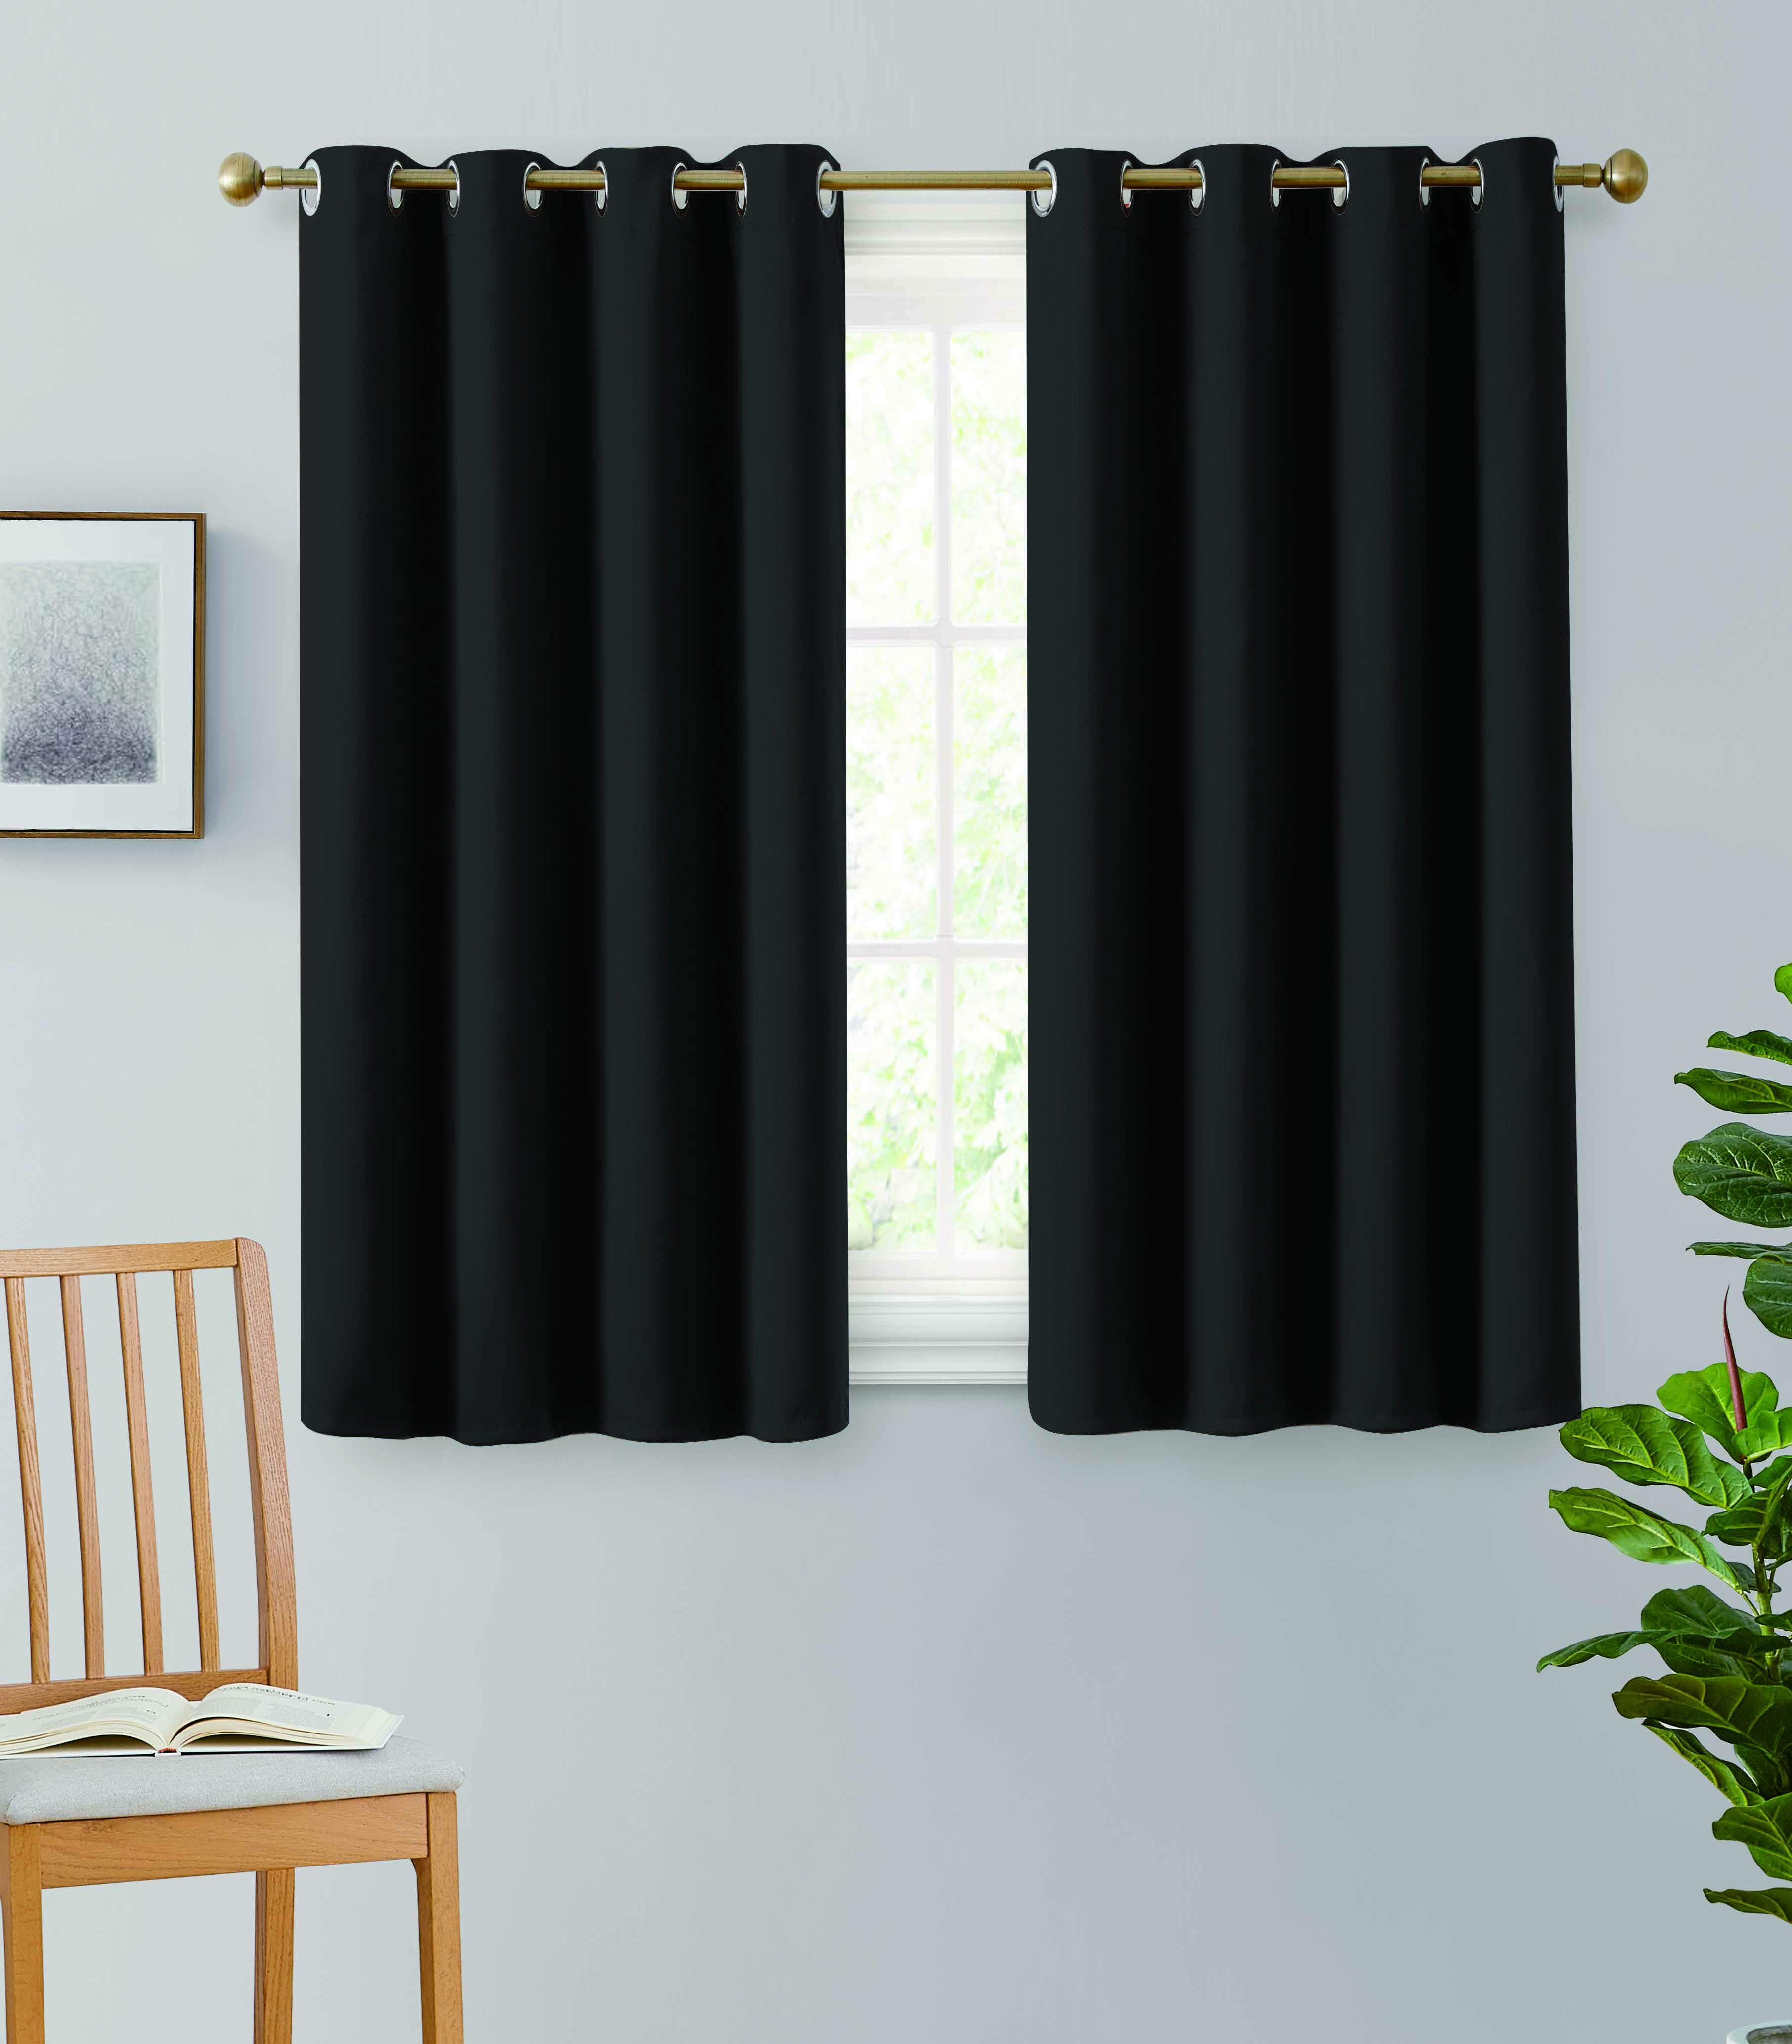 TOGETHER 2PC ROOM DARKENING INSULATED BLACKOUT WINDOW CURTAIN PANEL 70"W X 63"L 